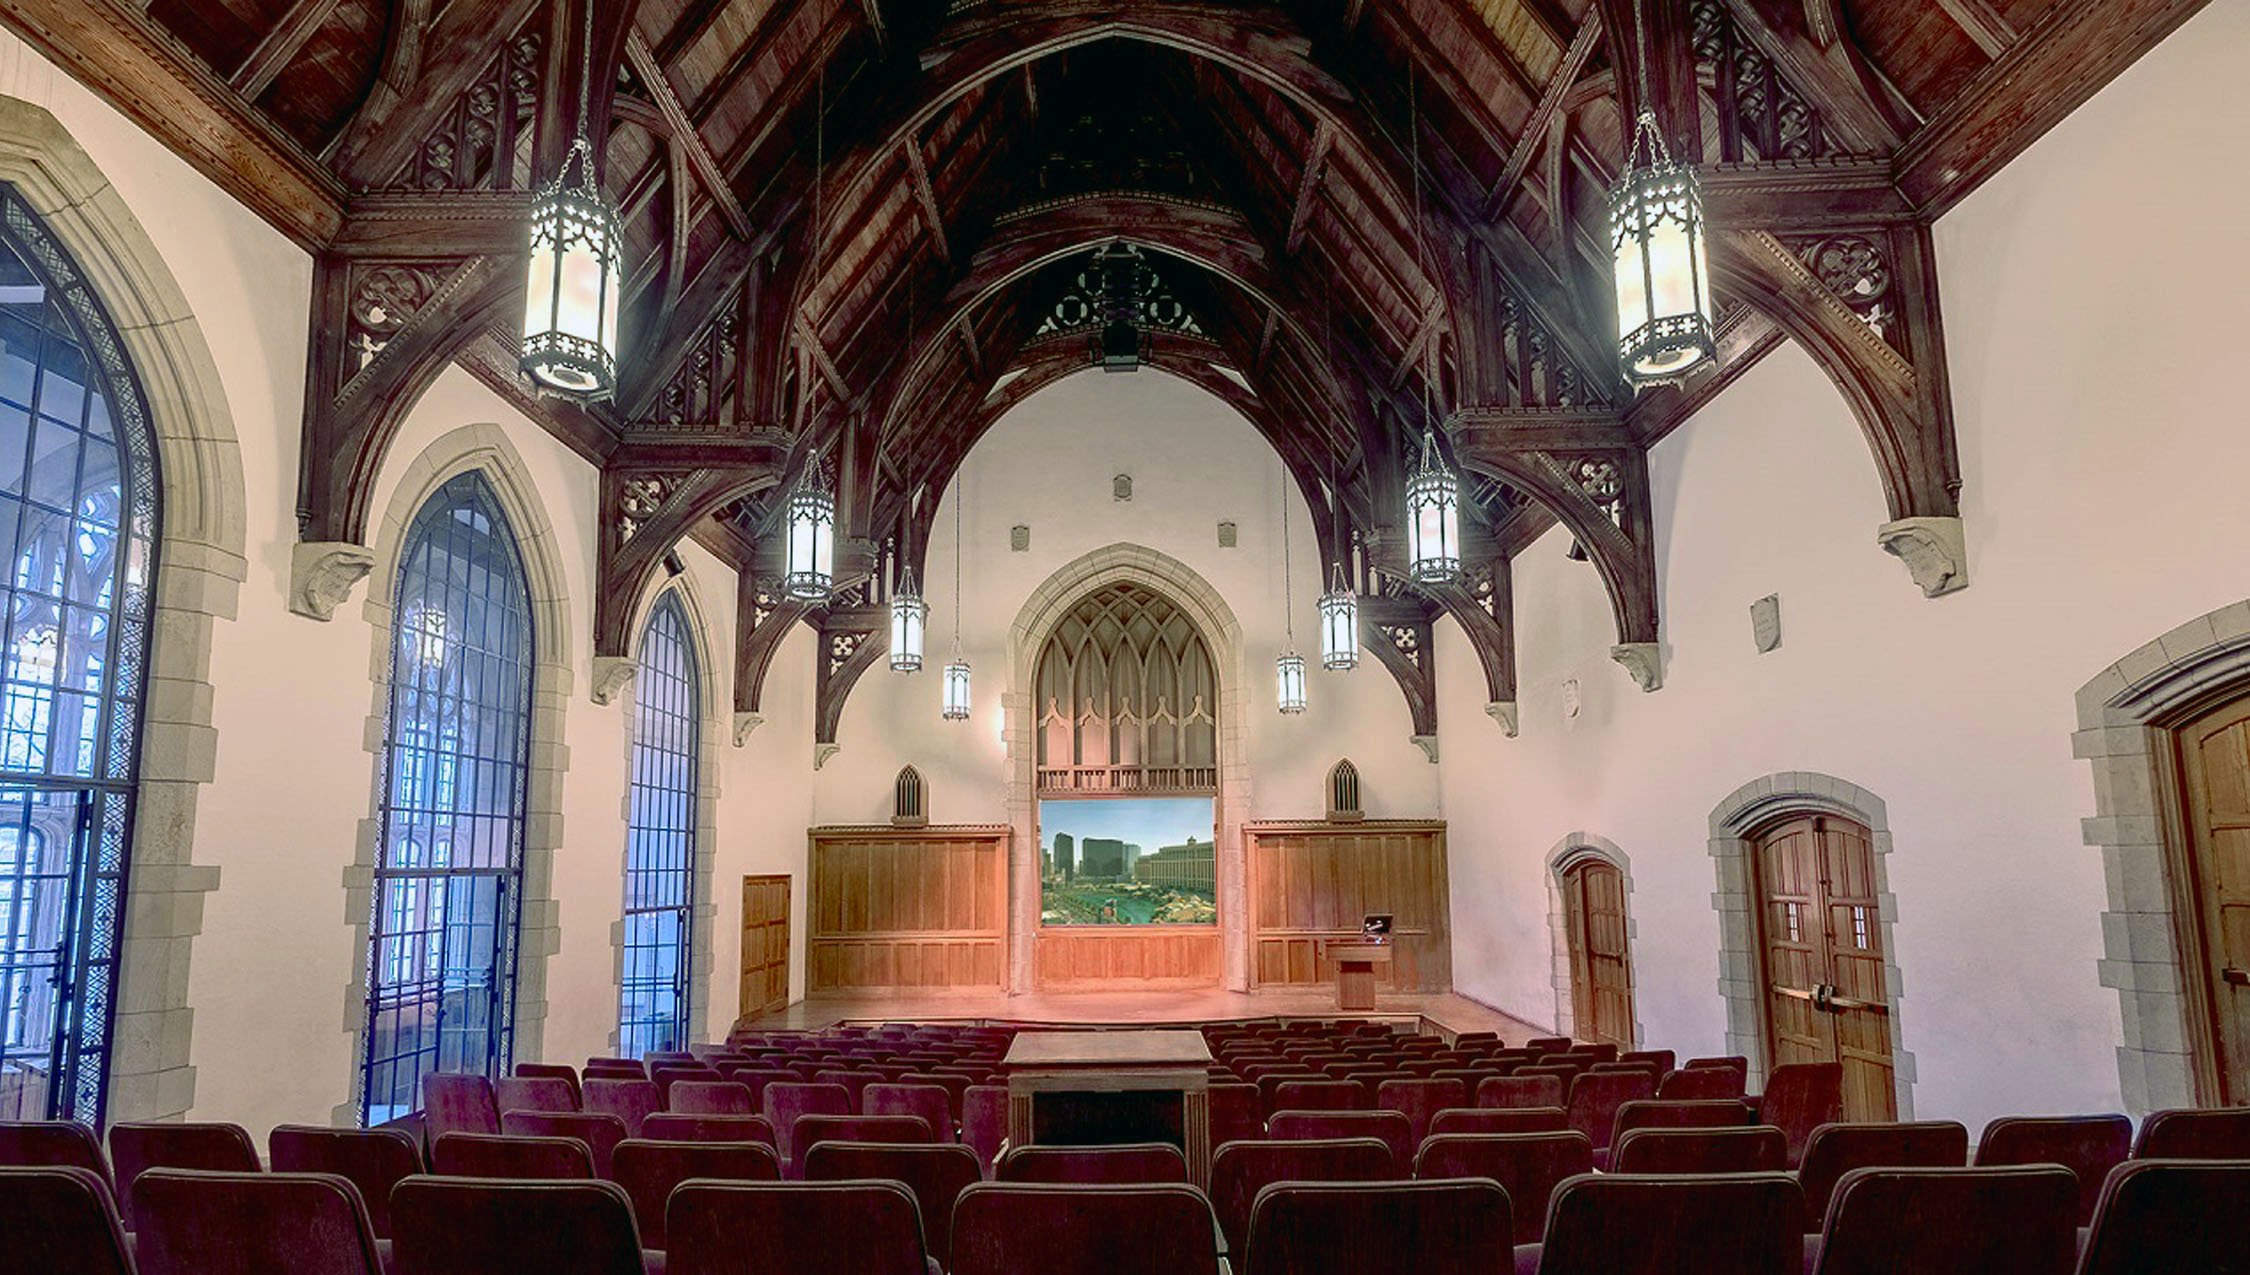 Sound system set up by L-Acoustics in the Yale University Gothic architecture